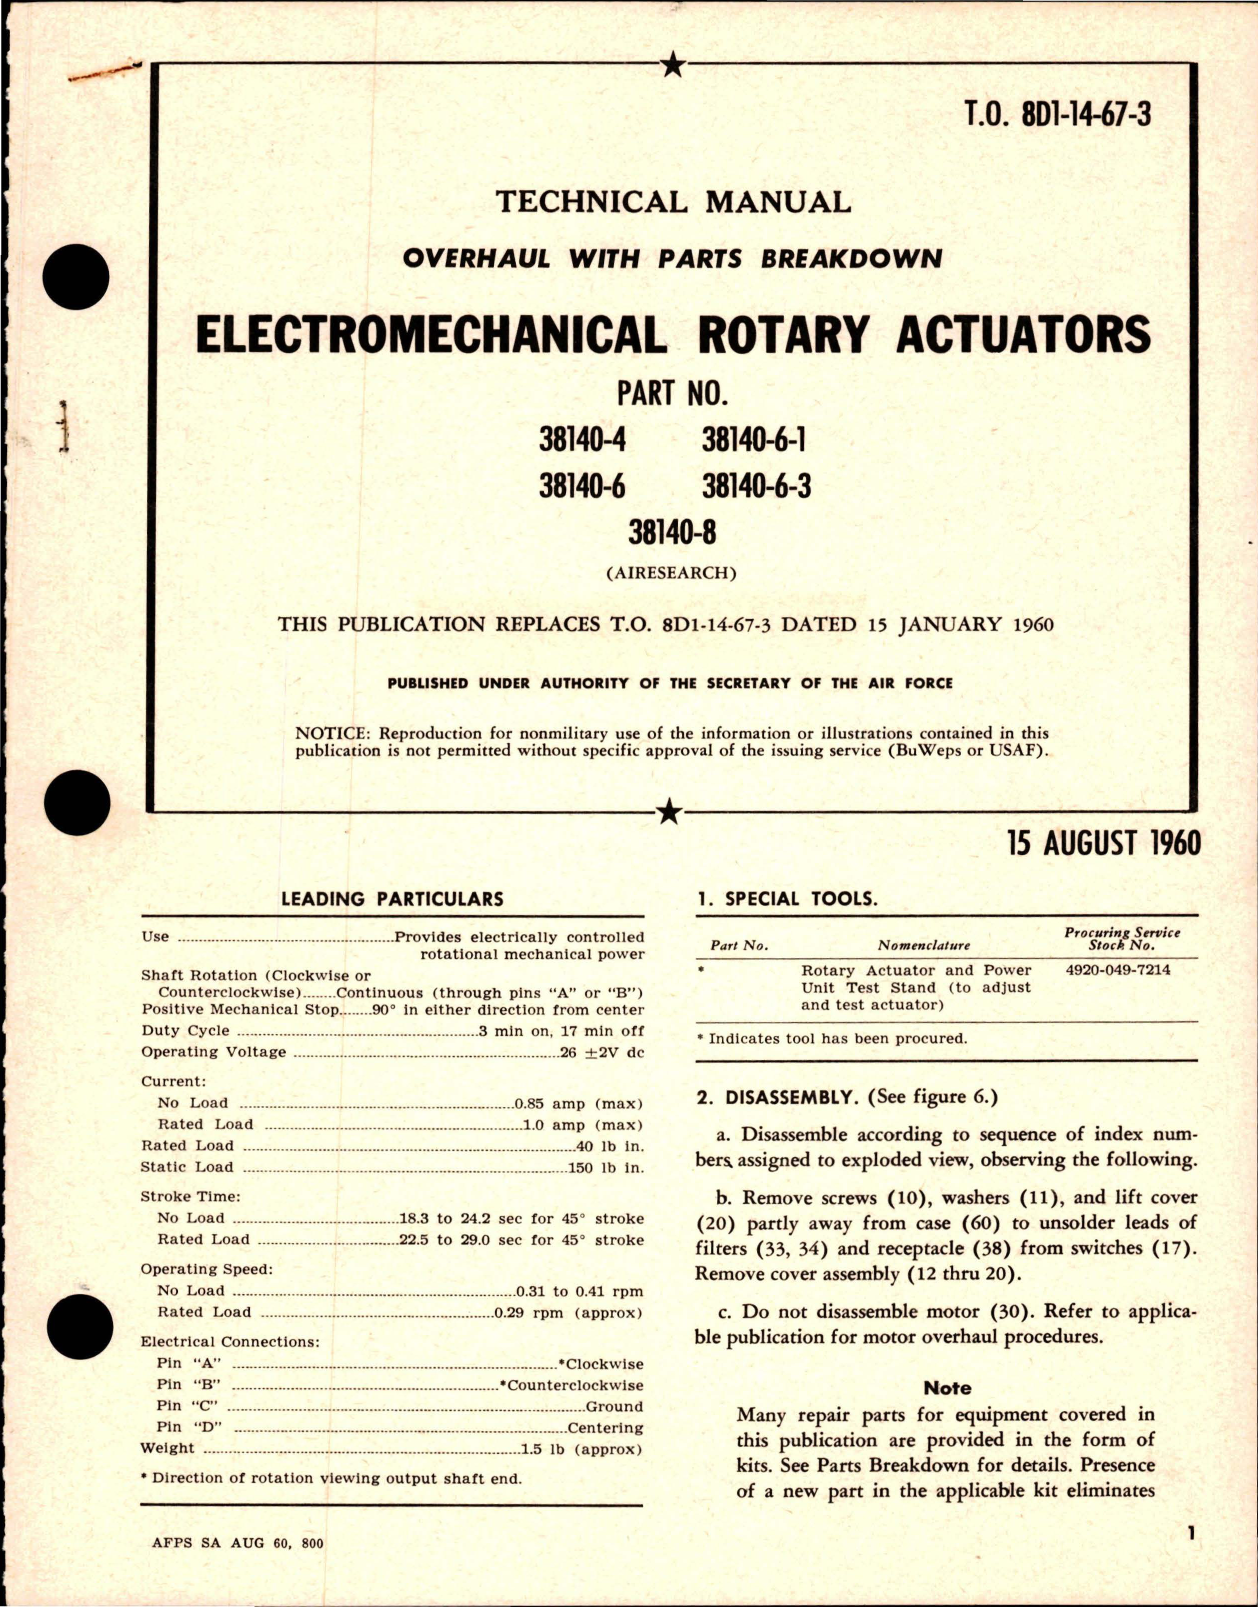 Sample page 1 from AirCorps Library document: Overhaul with Parts Breakdown for Electromechanical Rotary Actuators - Parts 38140-4, 38140-6-1, 38140-6, 38140-6-3, 38140-8 